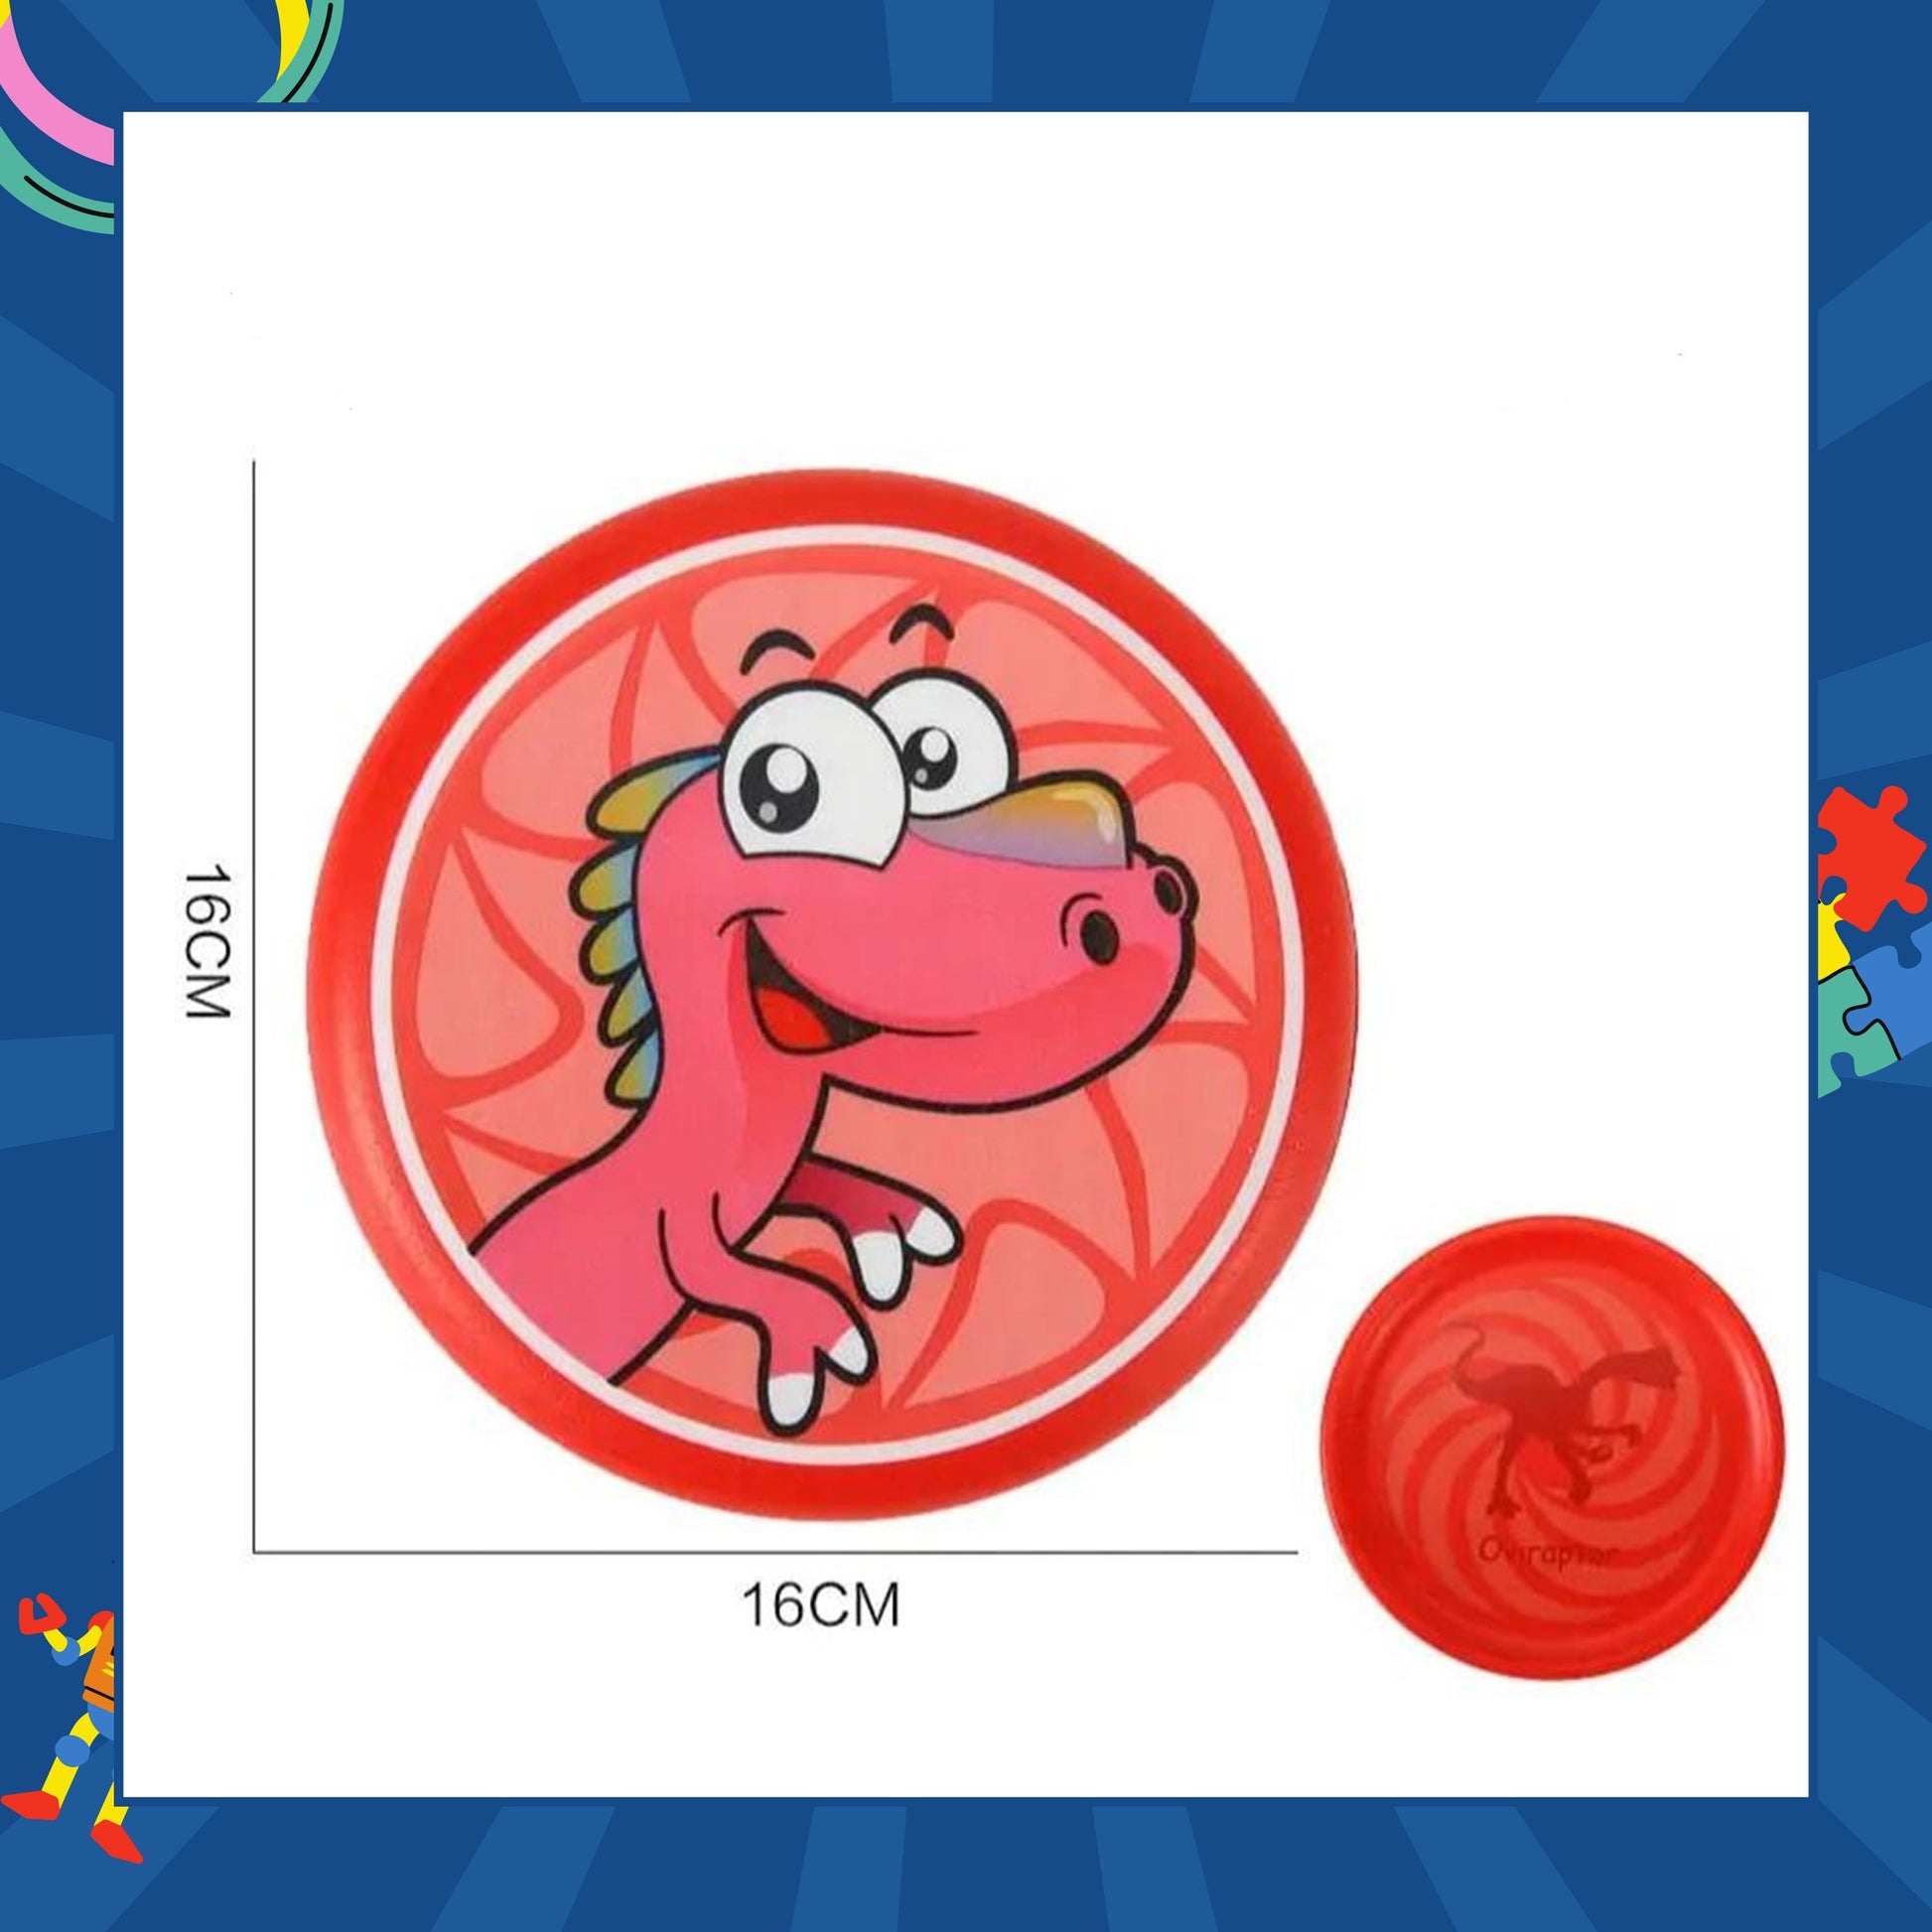 FunFlight_Frisbee_YippeeToys_Red_Dino_16cm